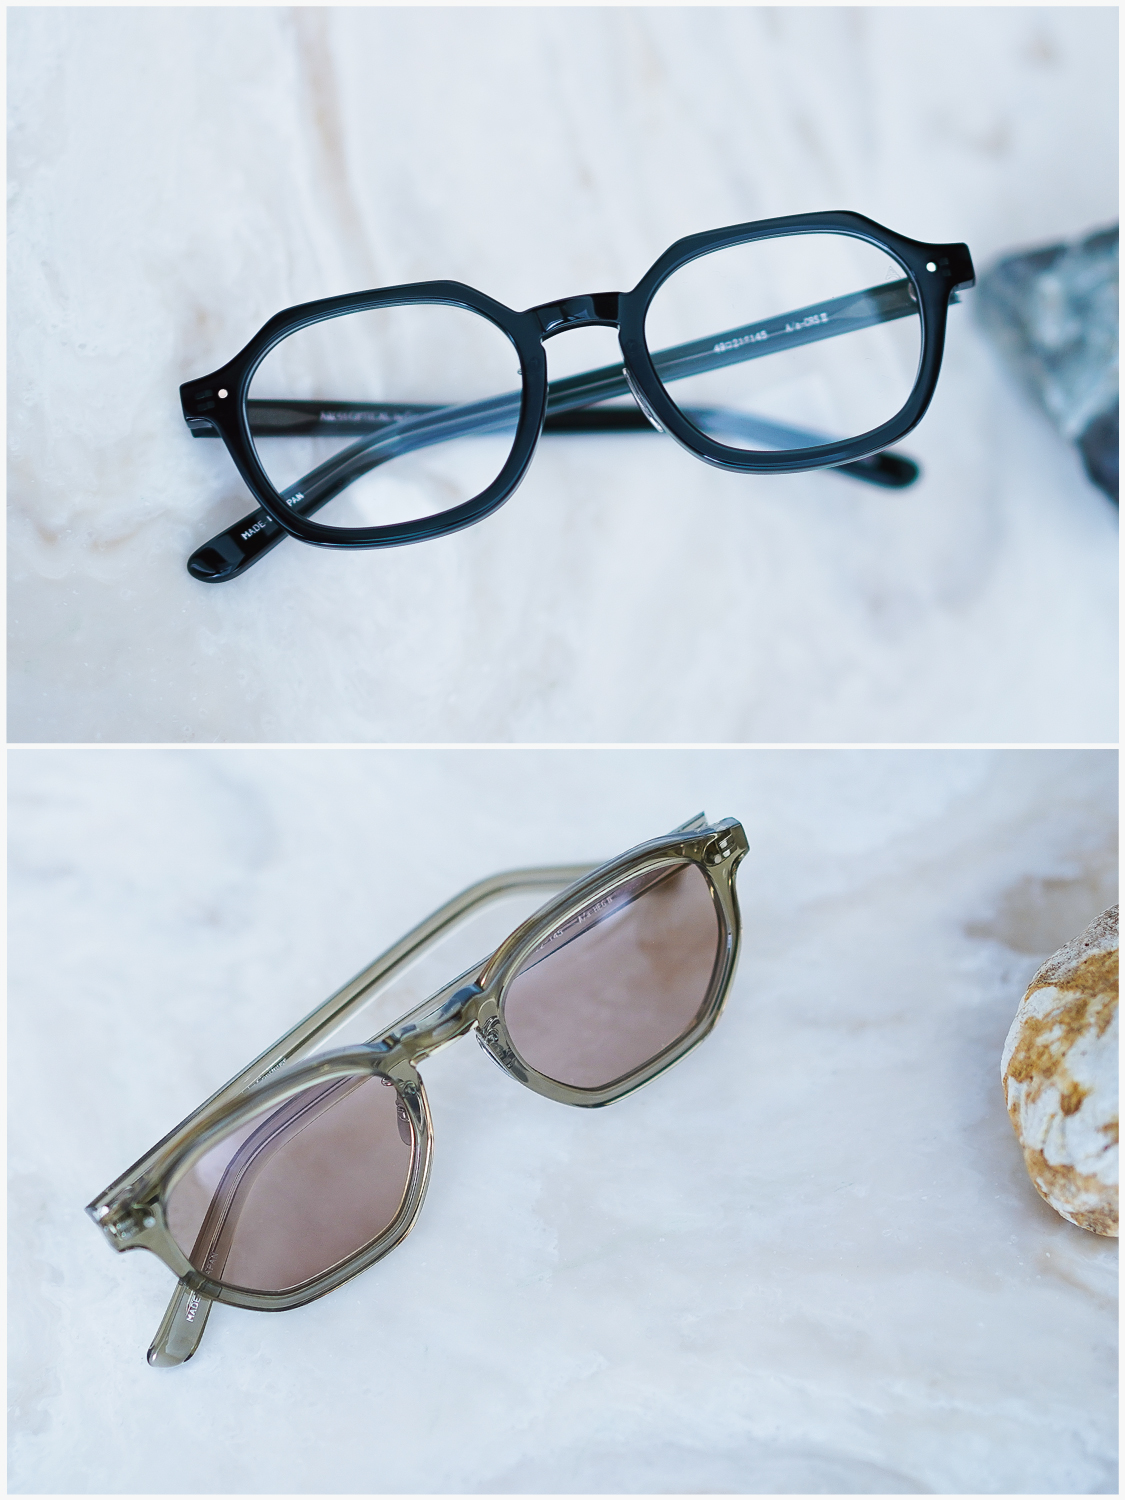 ARCH OPTICAL｜NEW COLLECTION 22S/S